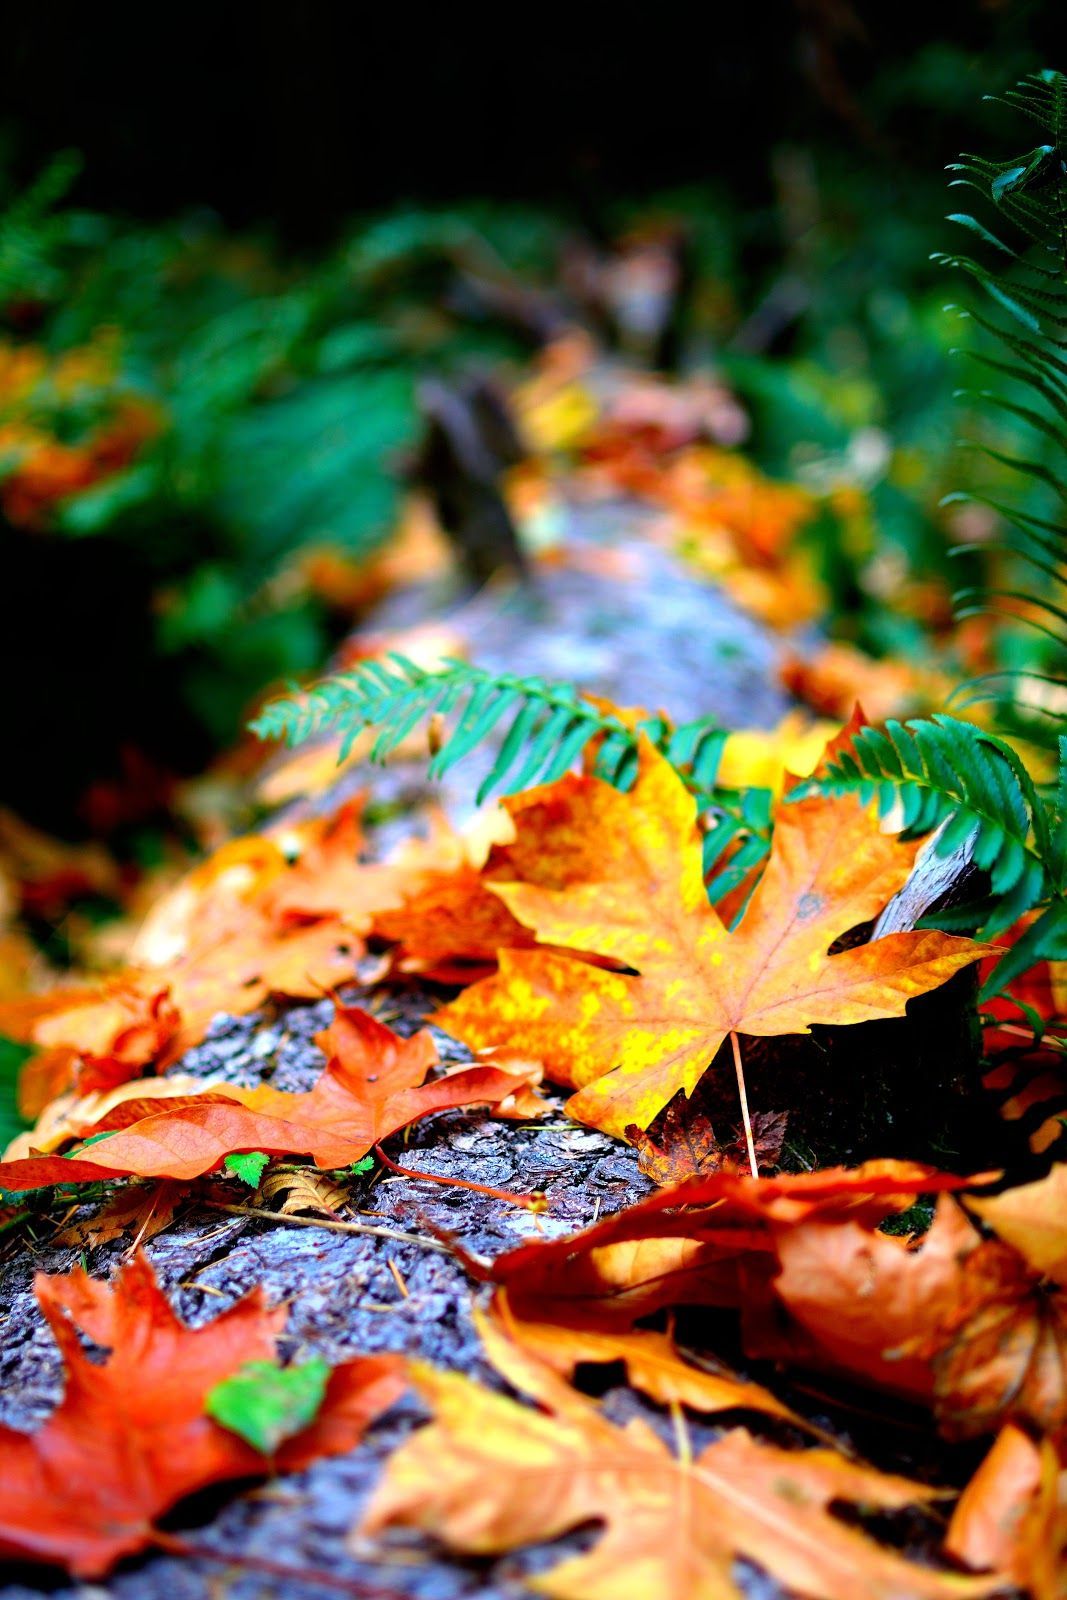 4k Wallpaper Autumn Leaves Blur Close Up Photo of Dry Leaves